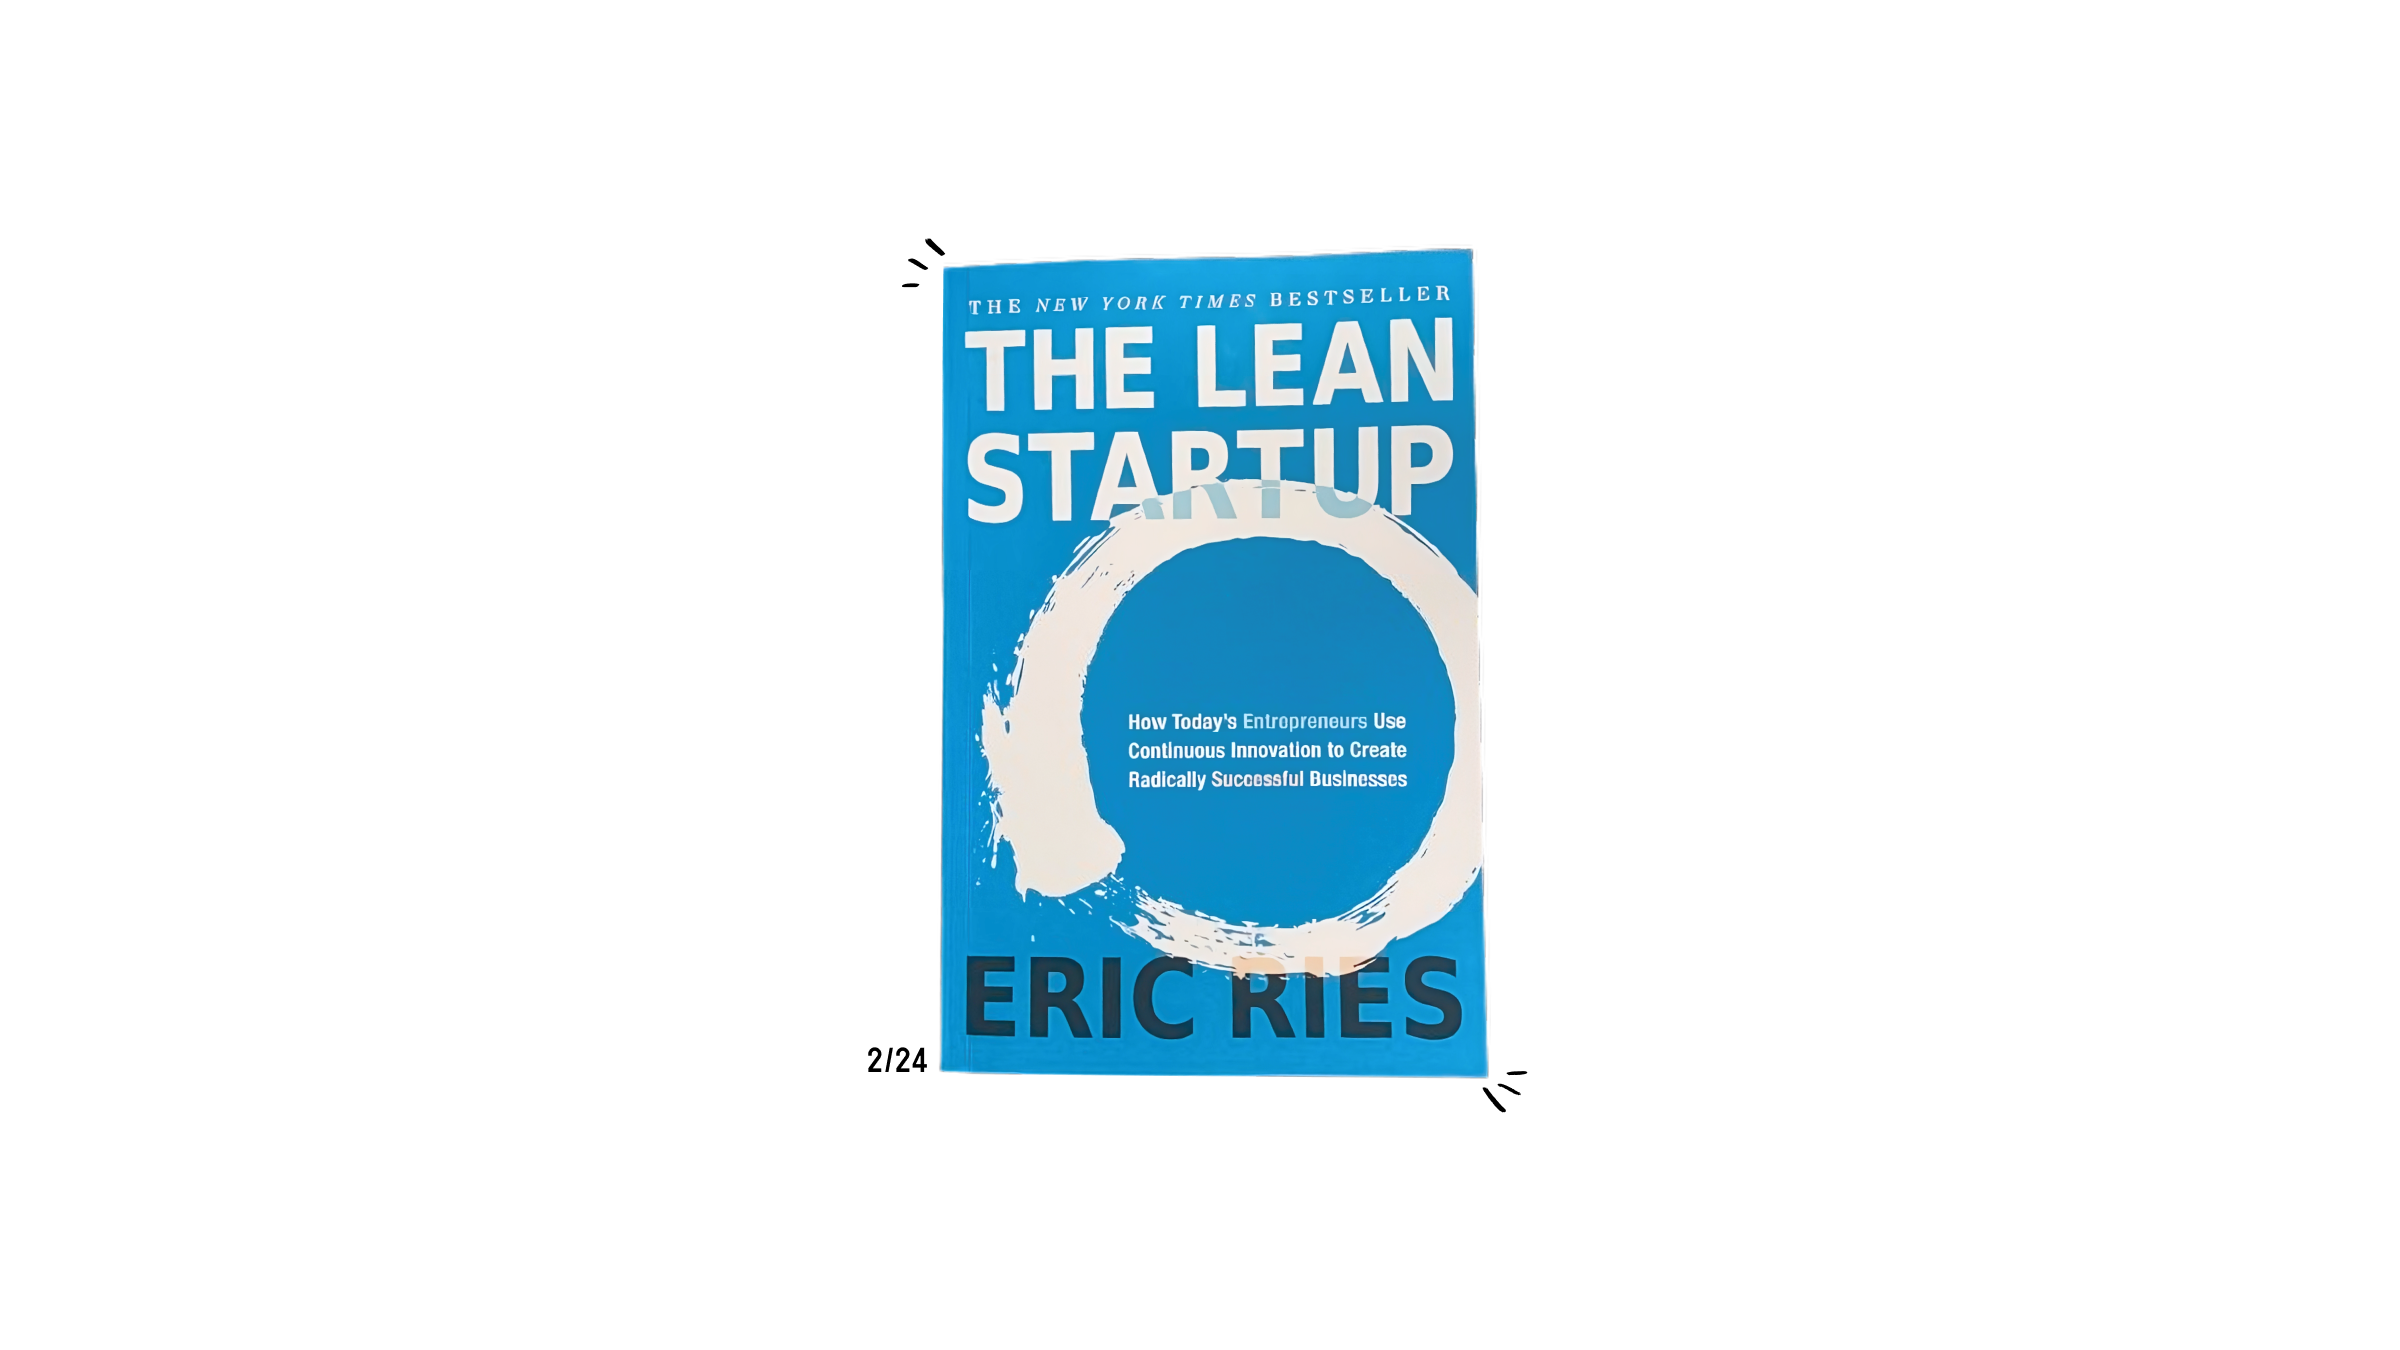 Transposed image of The Lean Startup by Eric Ries